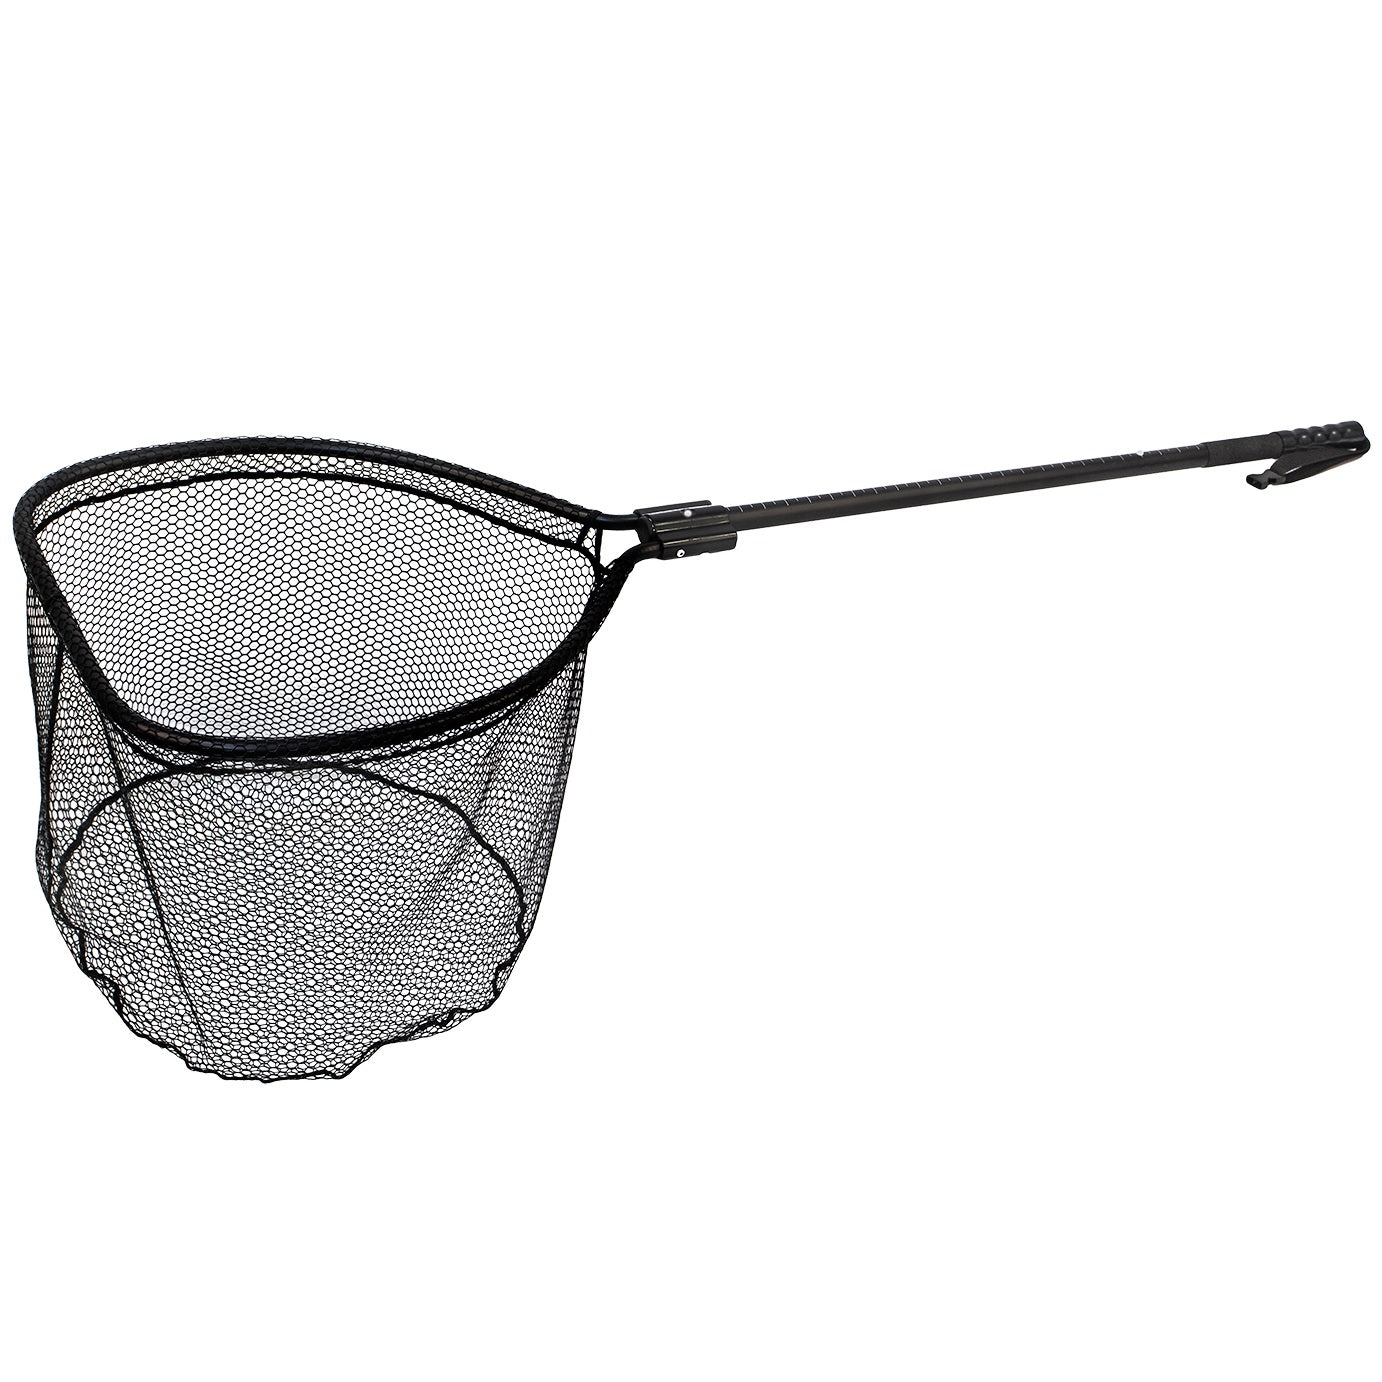 McLean Angling Saltwater Measure & Weigh Net XL - Rubber